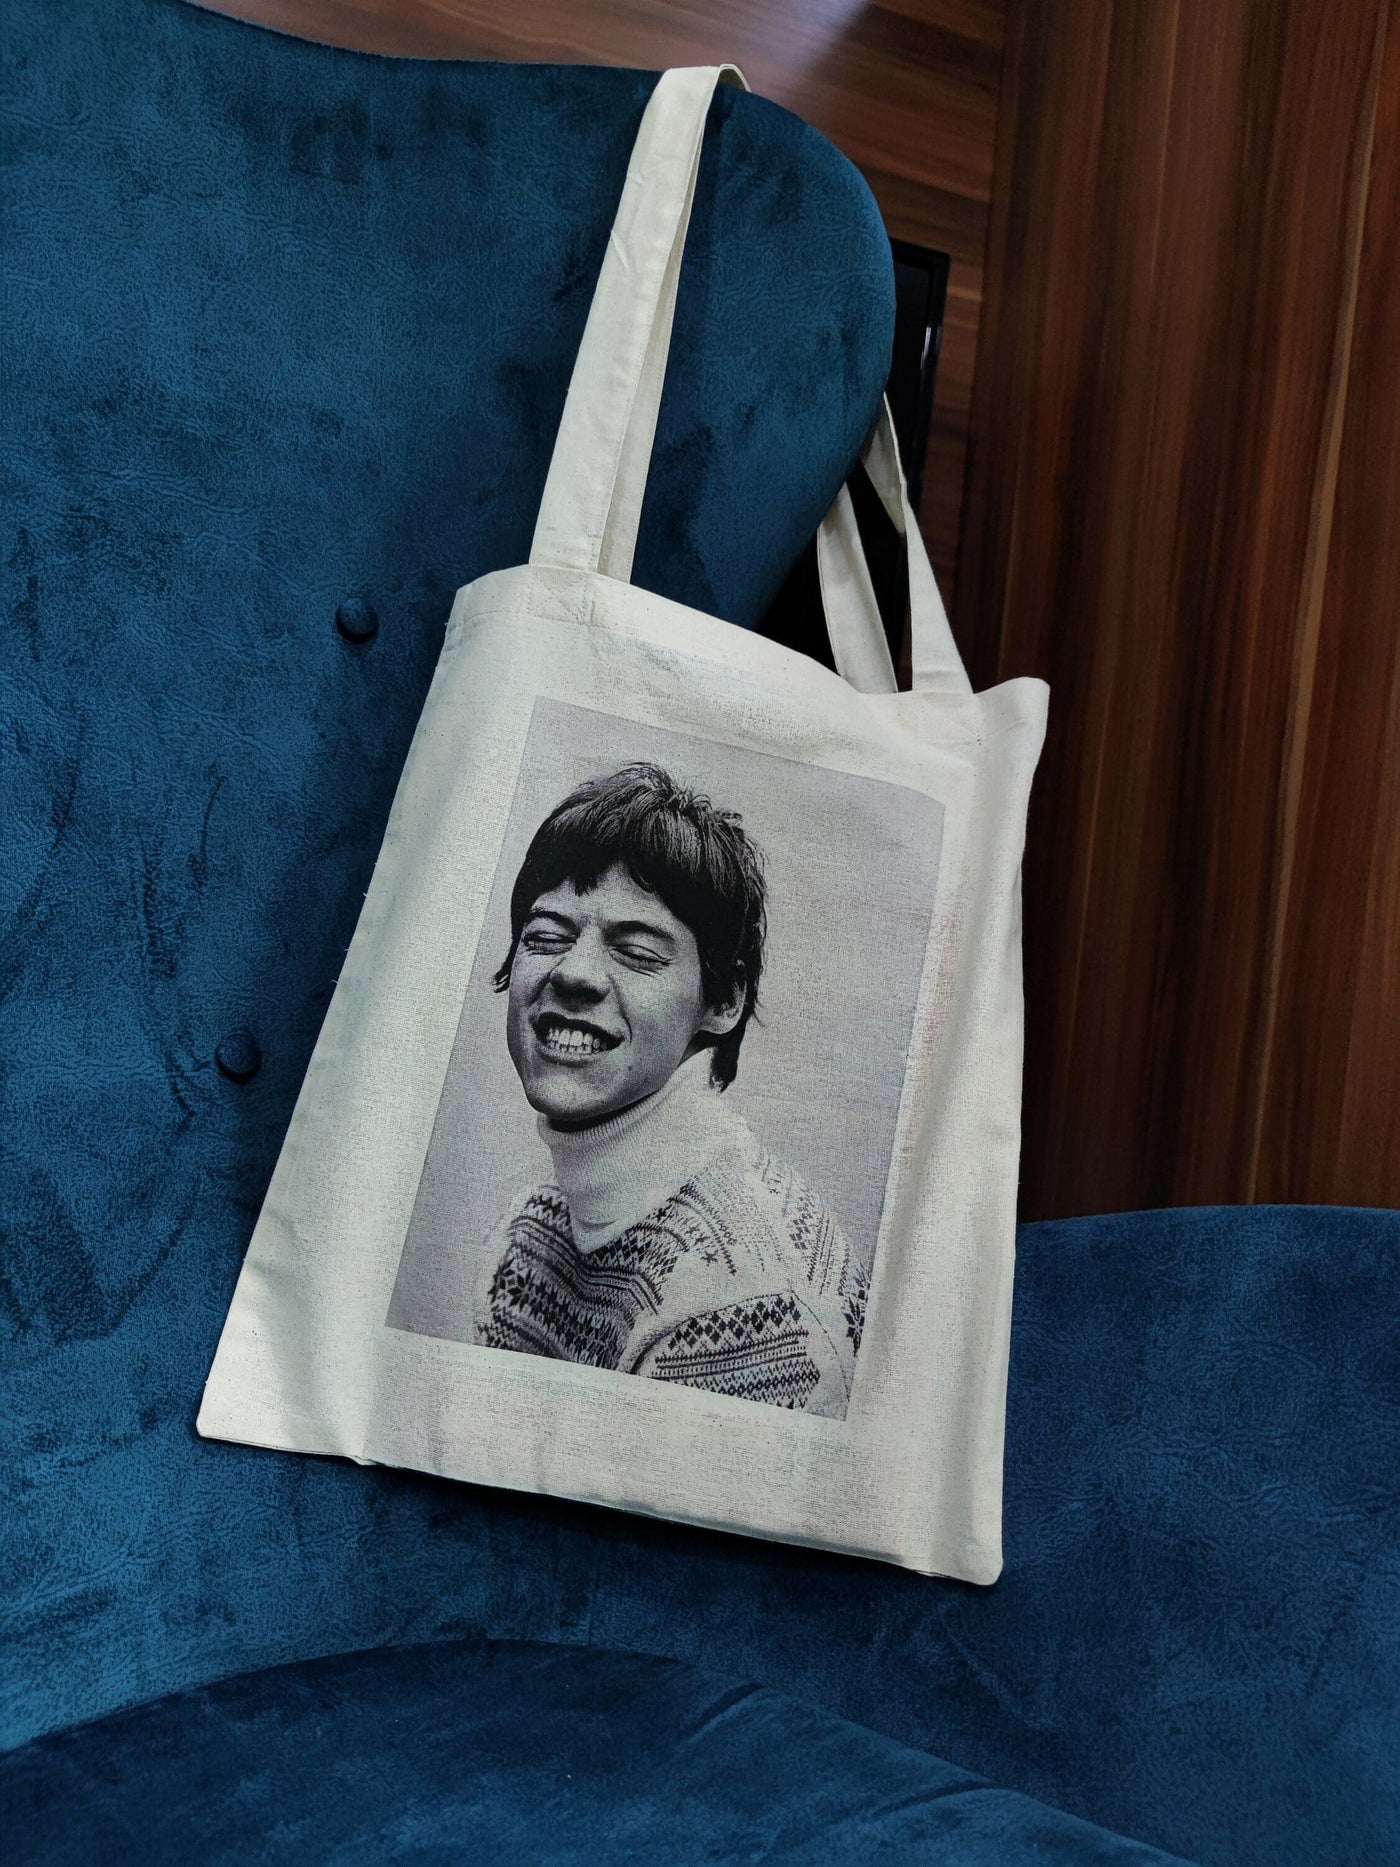 Harry Styles Tote Bag